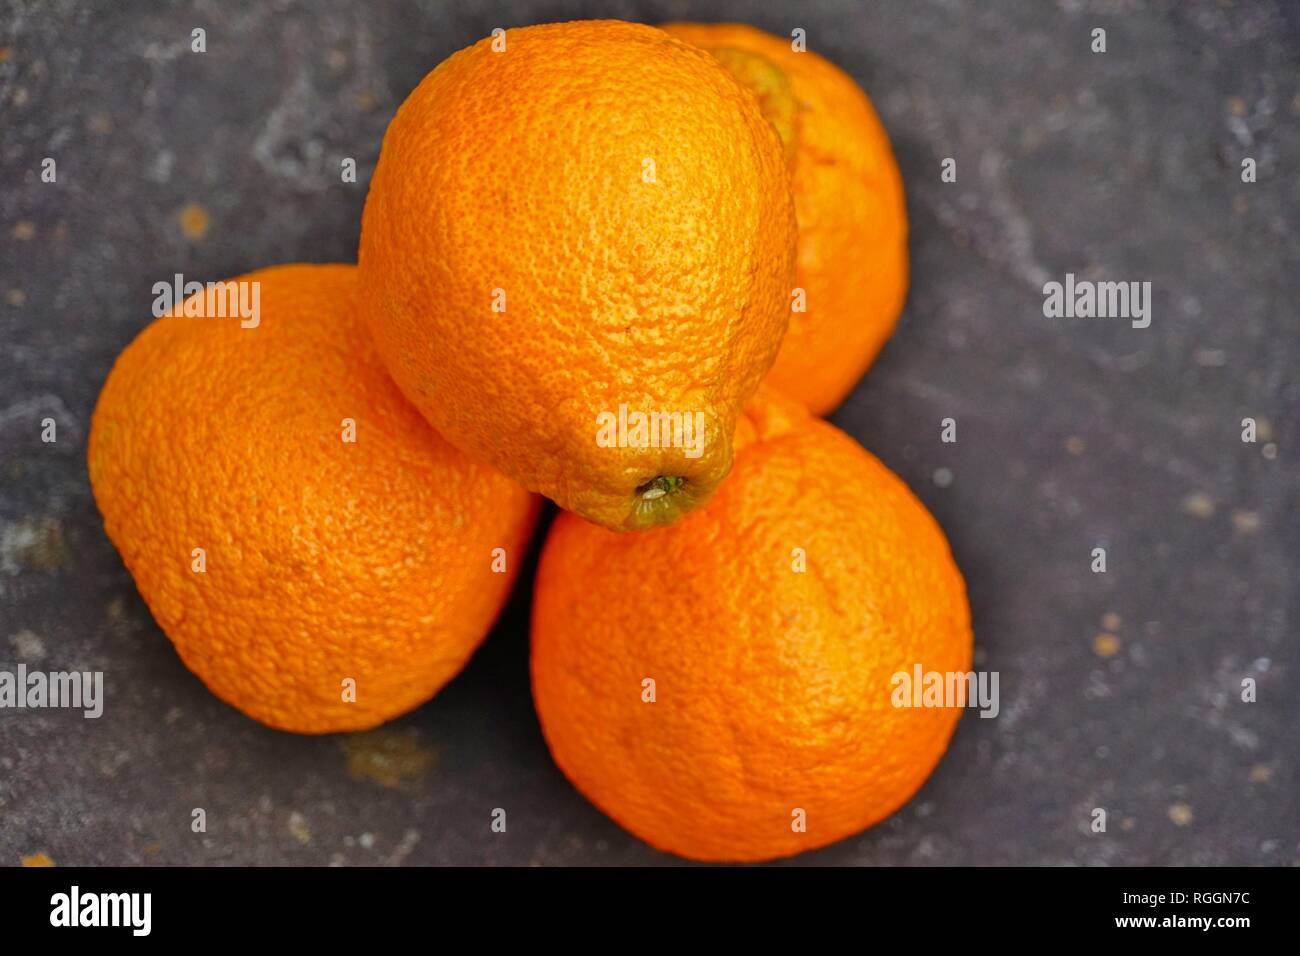 turns out sumo citrus are giant mandarins from Japan & they lived